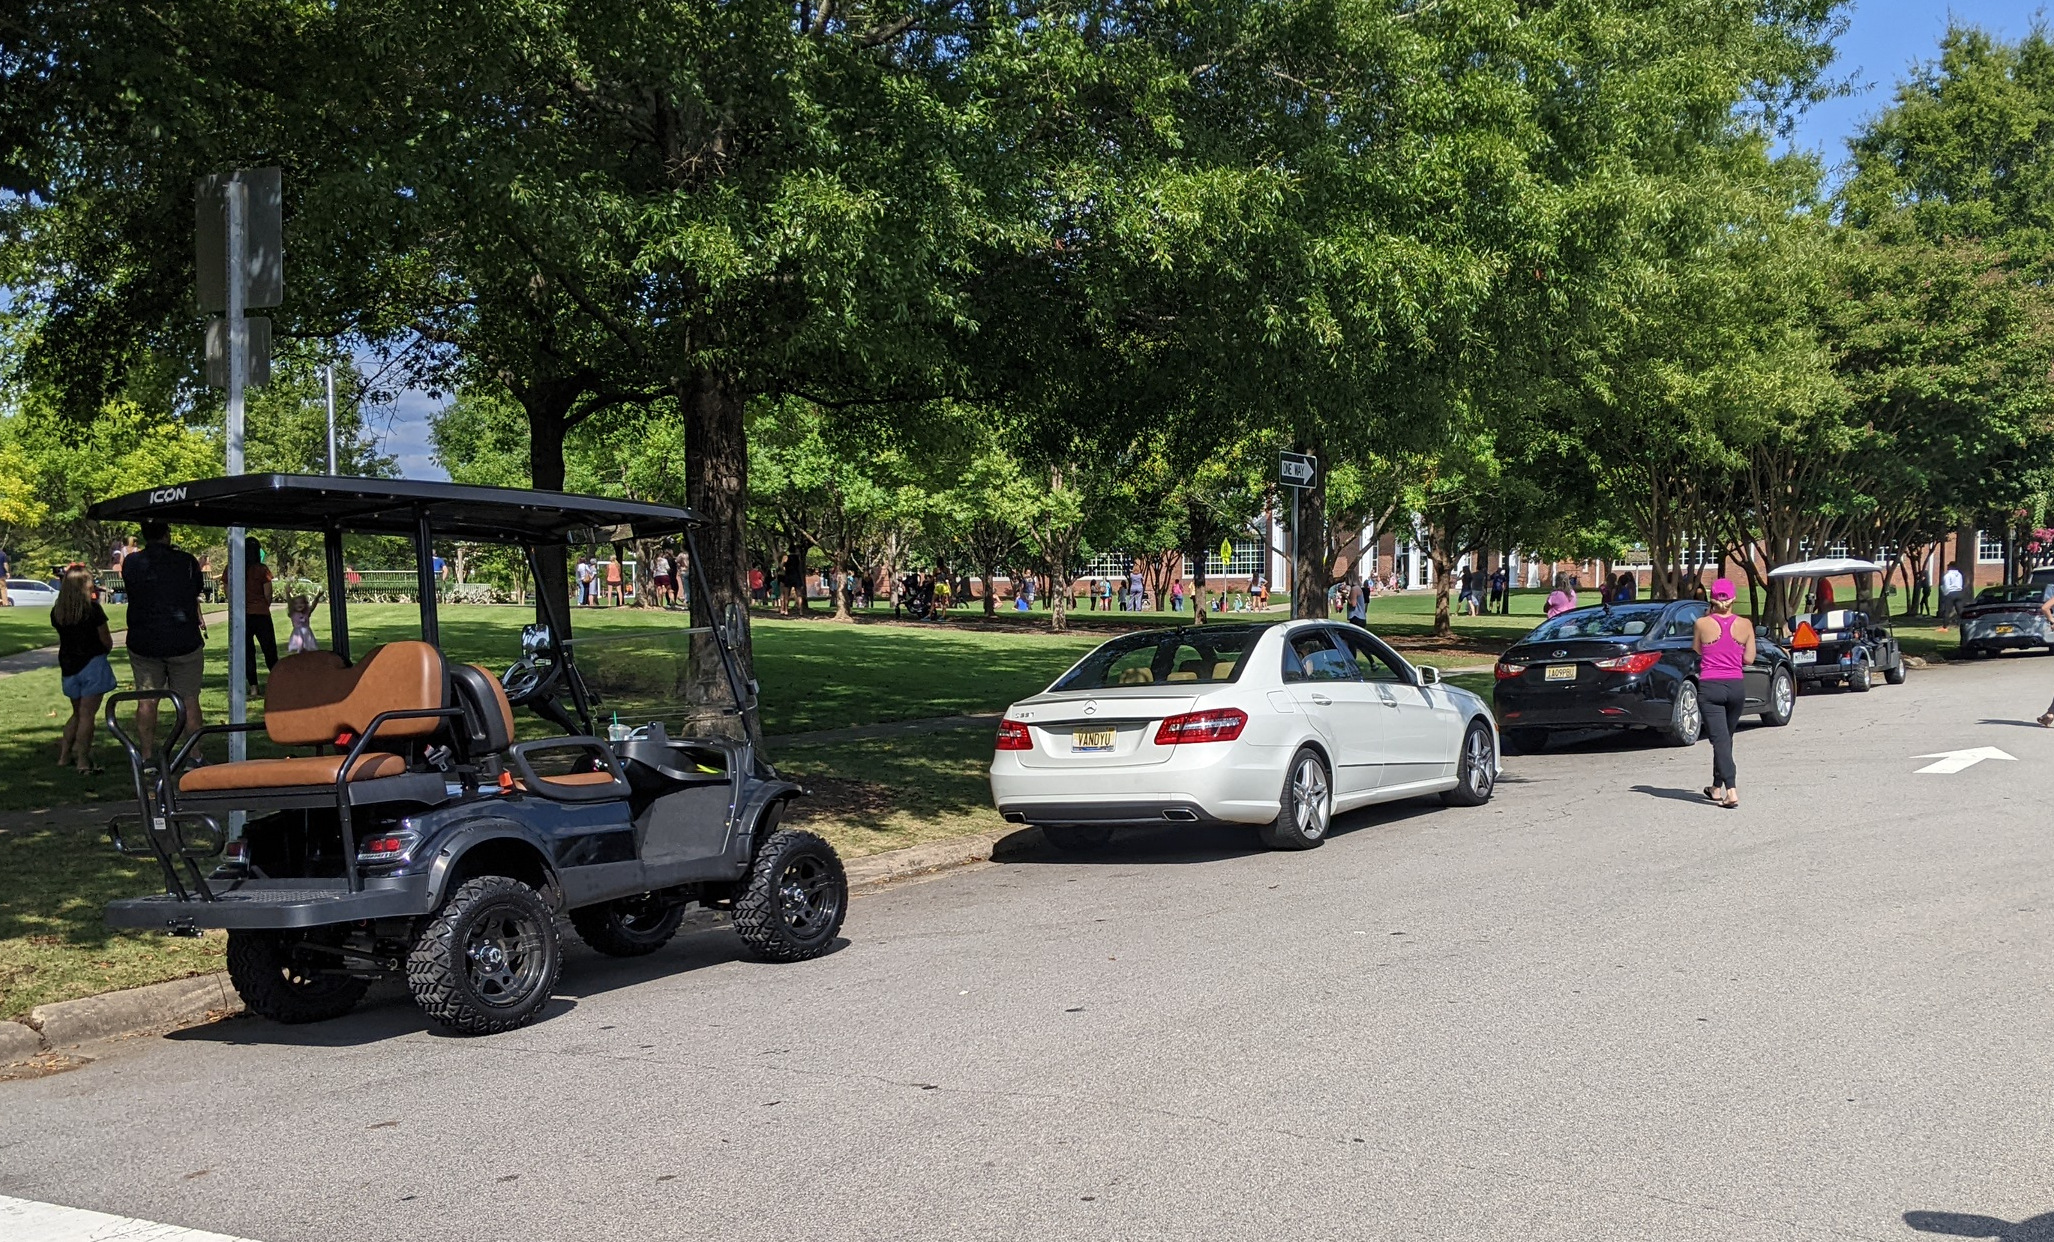 Trussville Council discusses 'low-speed vehicle' ordinance for golf carts, street cars